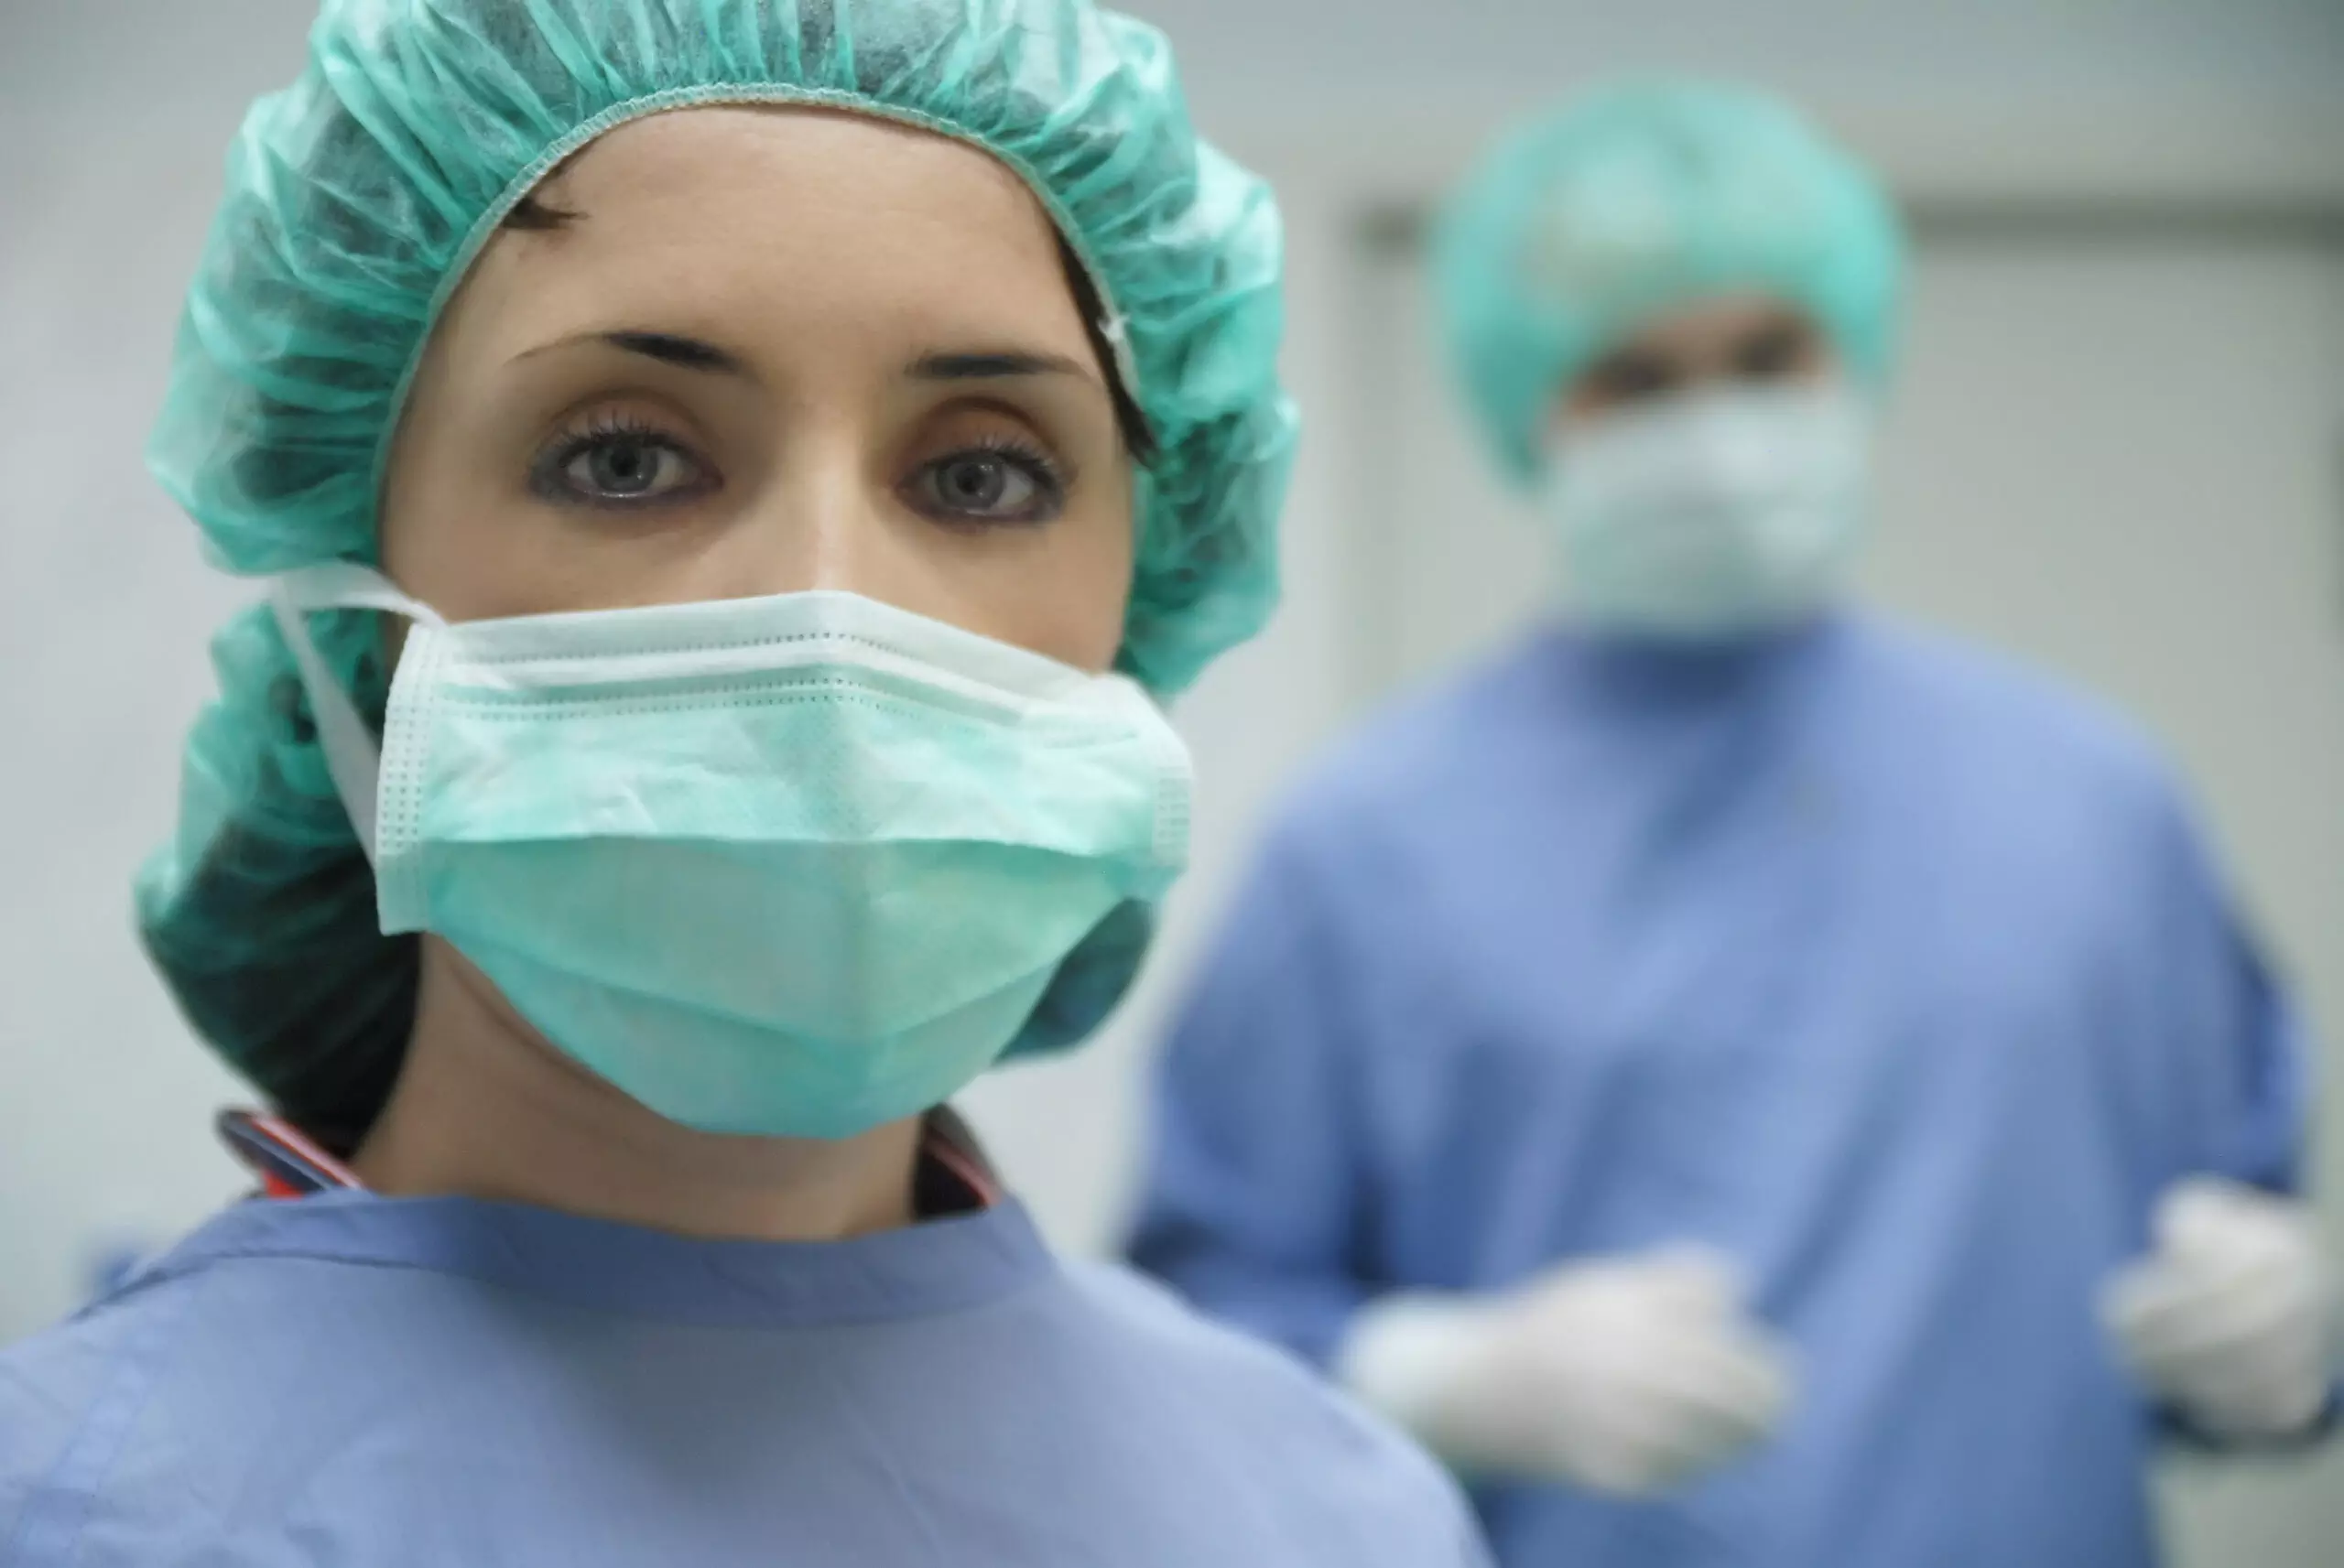 Medical professionals in scrubs and surgical masks.